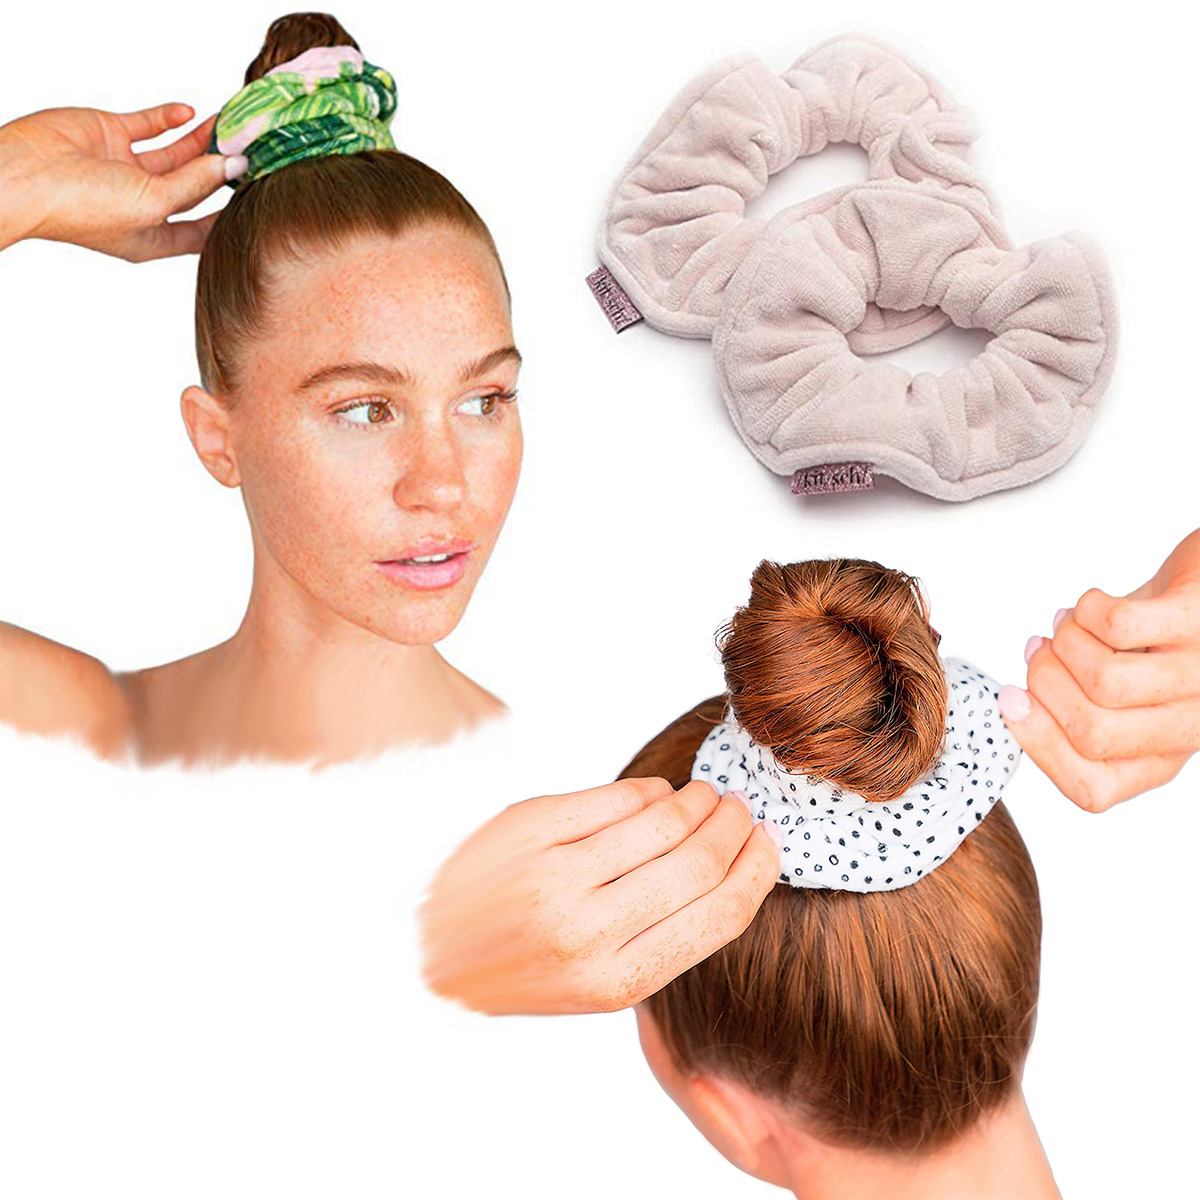 These Towel Scrunchies With 7,900+ 5-Star Reviews Dry My Hair Quickly